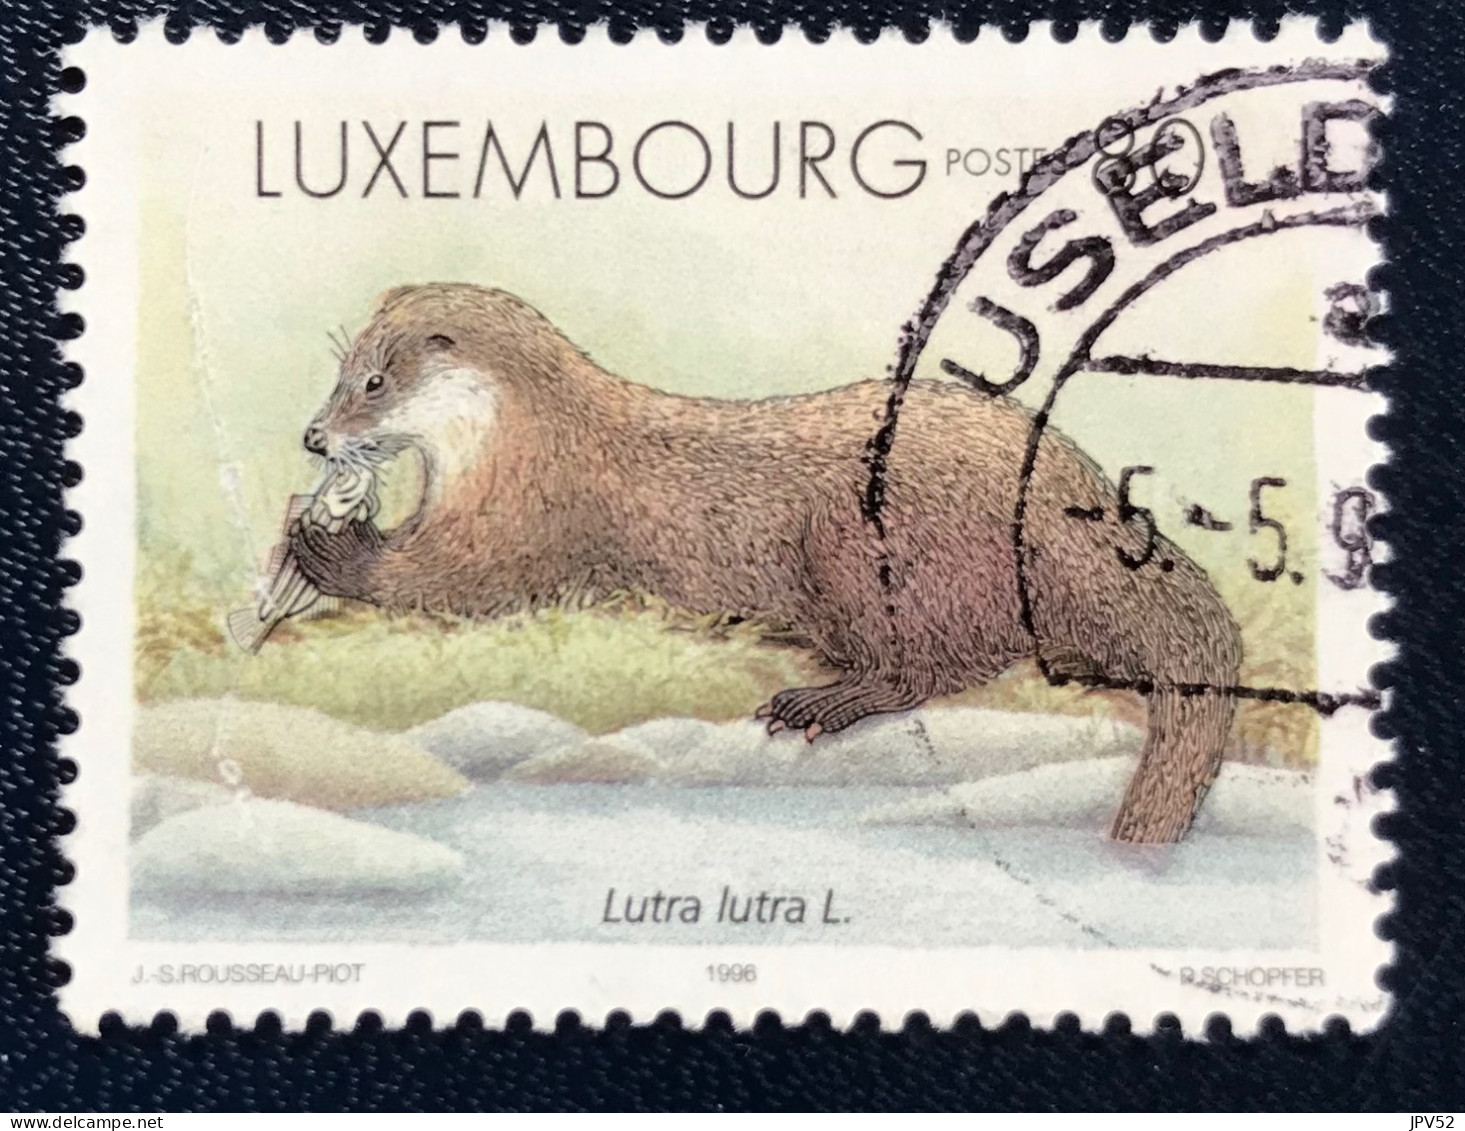 Luxembourg - Luxemburg - C18/32 - 1996 - (°)used - Michel 1402 - Pelsdieren - Used Stamps